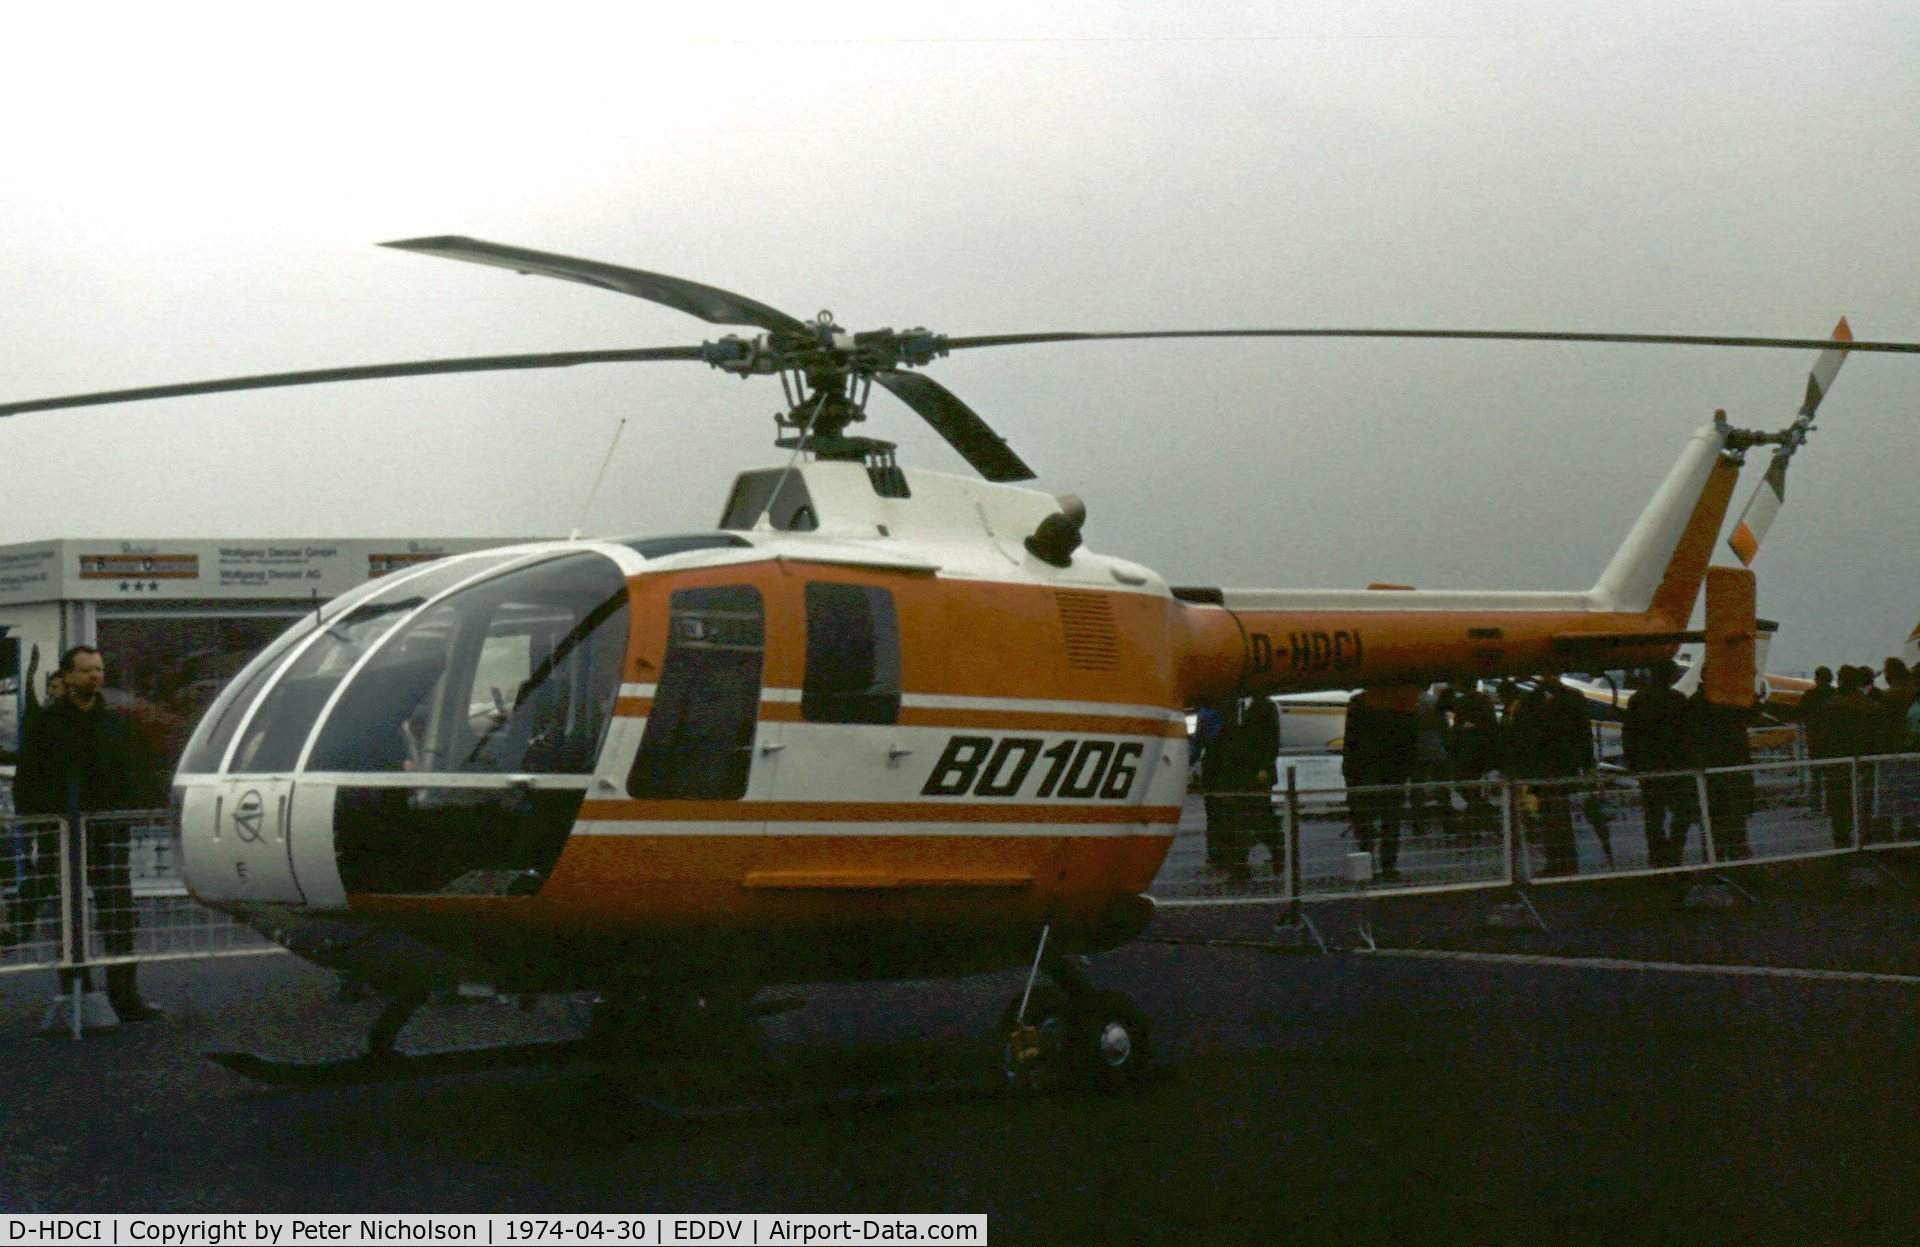 D-HDCI, 1973 MBB Bo-106 C/N S-84, Prototype MBB Bo.106 developed from the Bo.105 with widened cabin and two additional seats on display at the 1974 Hannover Airshow.